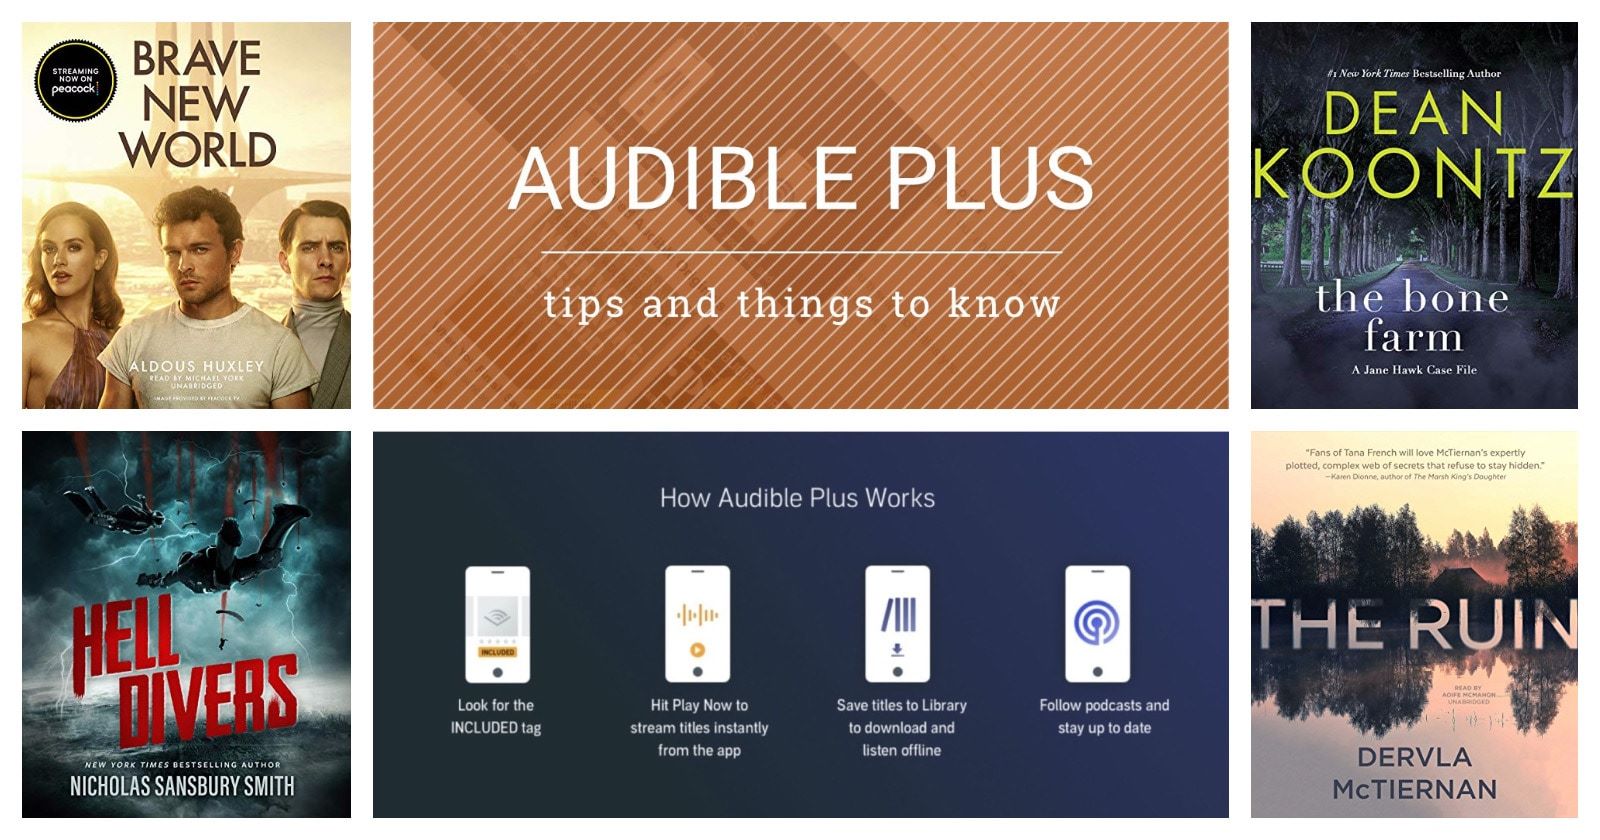 What Do You Get With Audible Plus